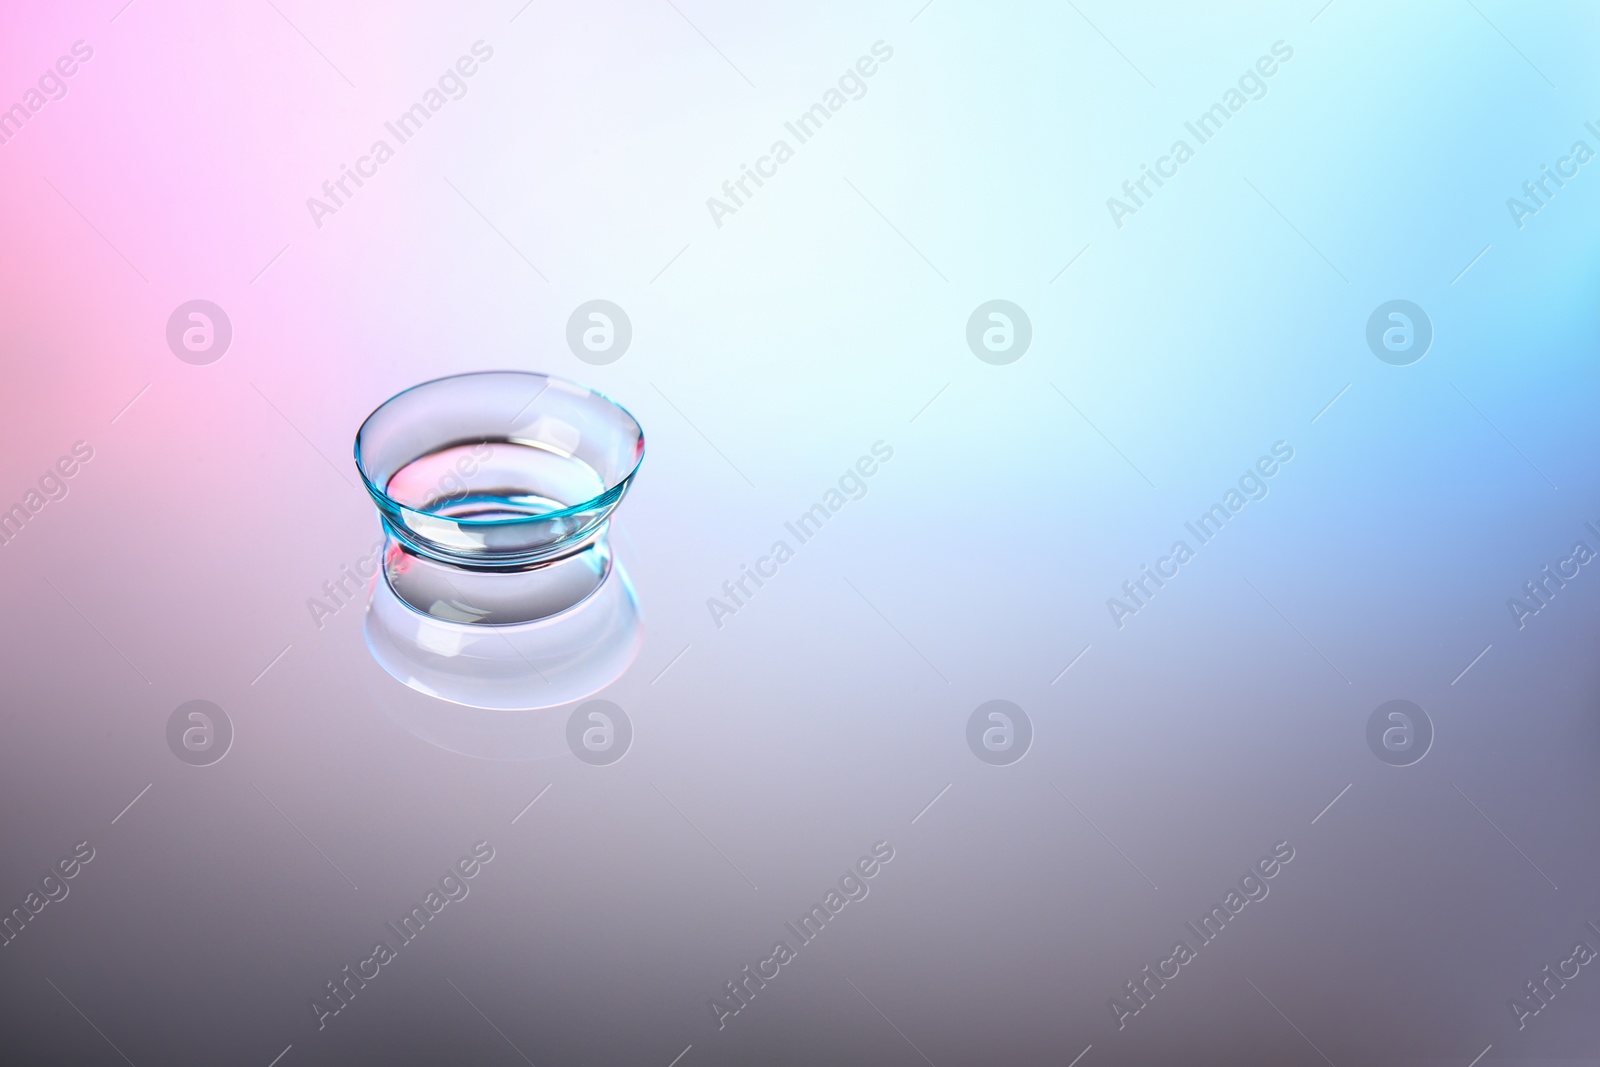 Photo of Contact lens on color background